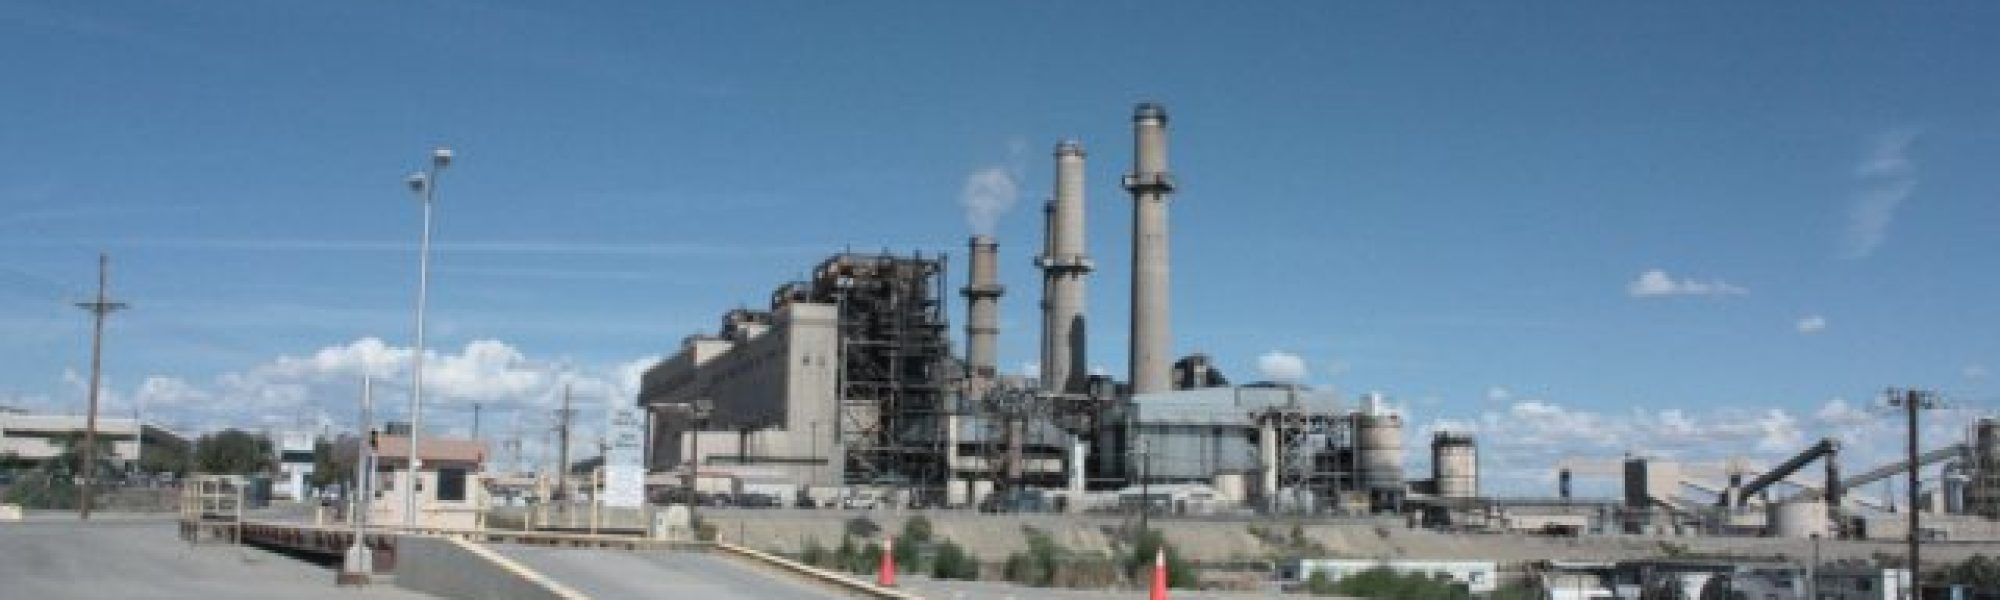 Enchant pushes forward with carbon capture project despite barriers